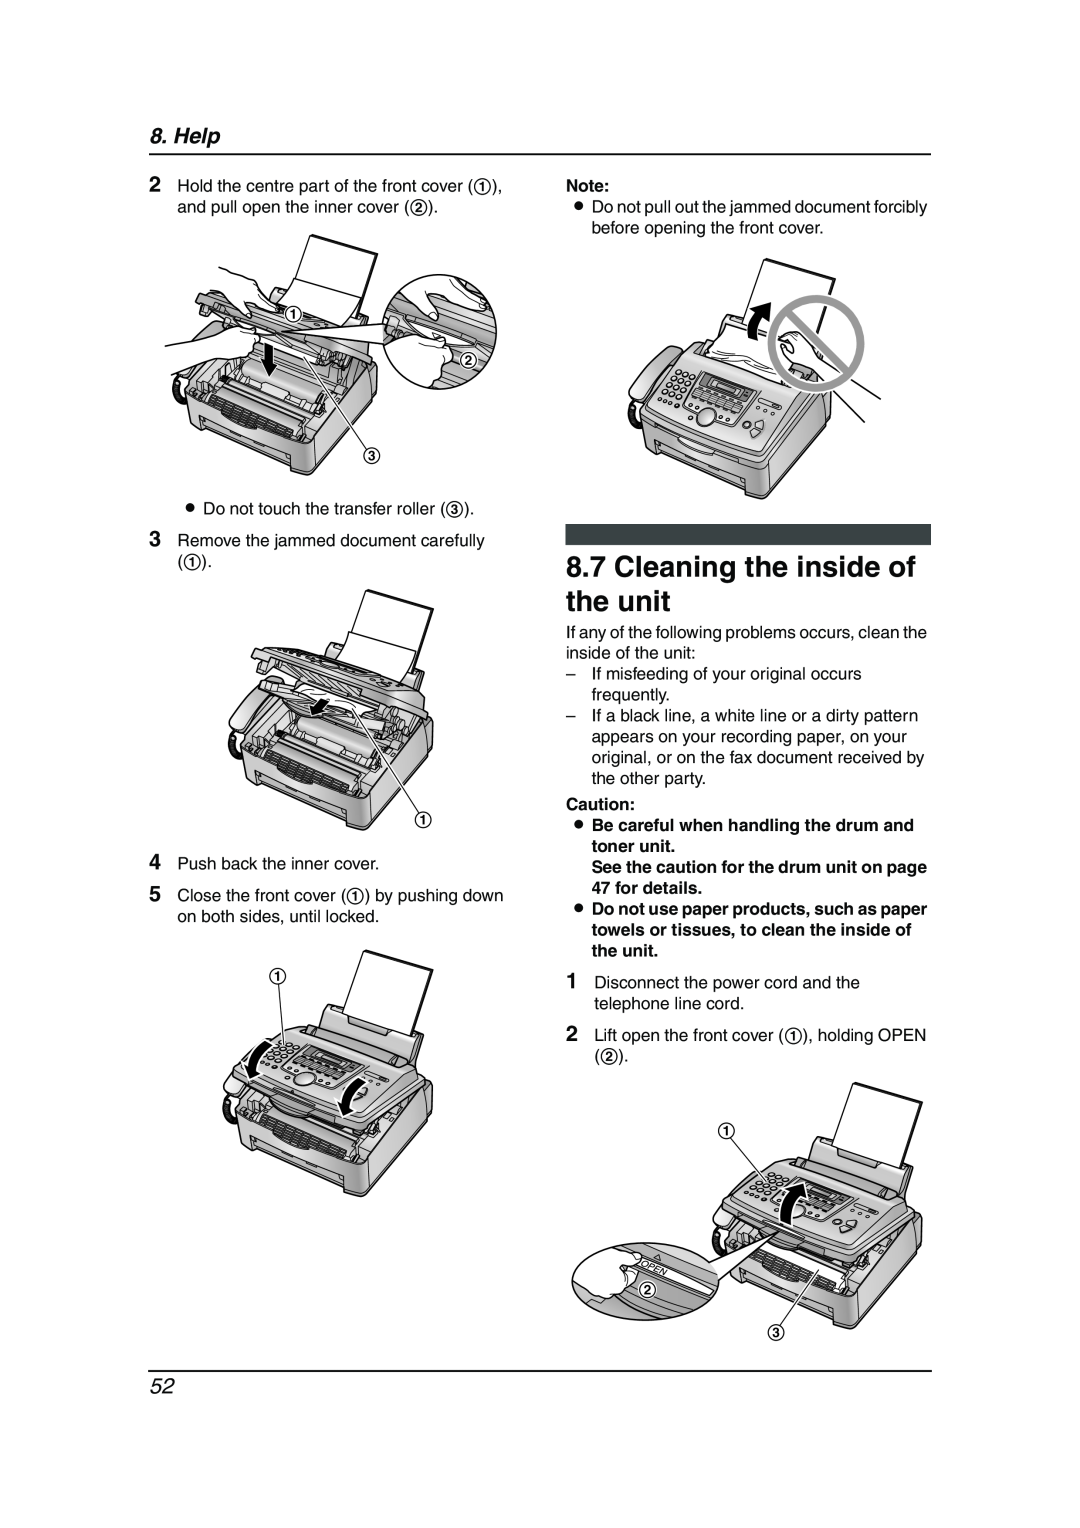 Panasonic KX-FL511AL manual Cleaning the inside of the unit, Help, L Be careful when handling the drum and toner unit 